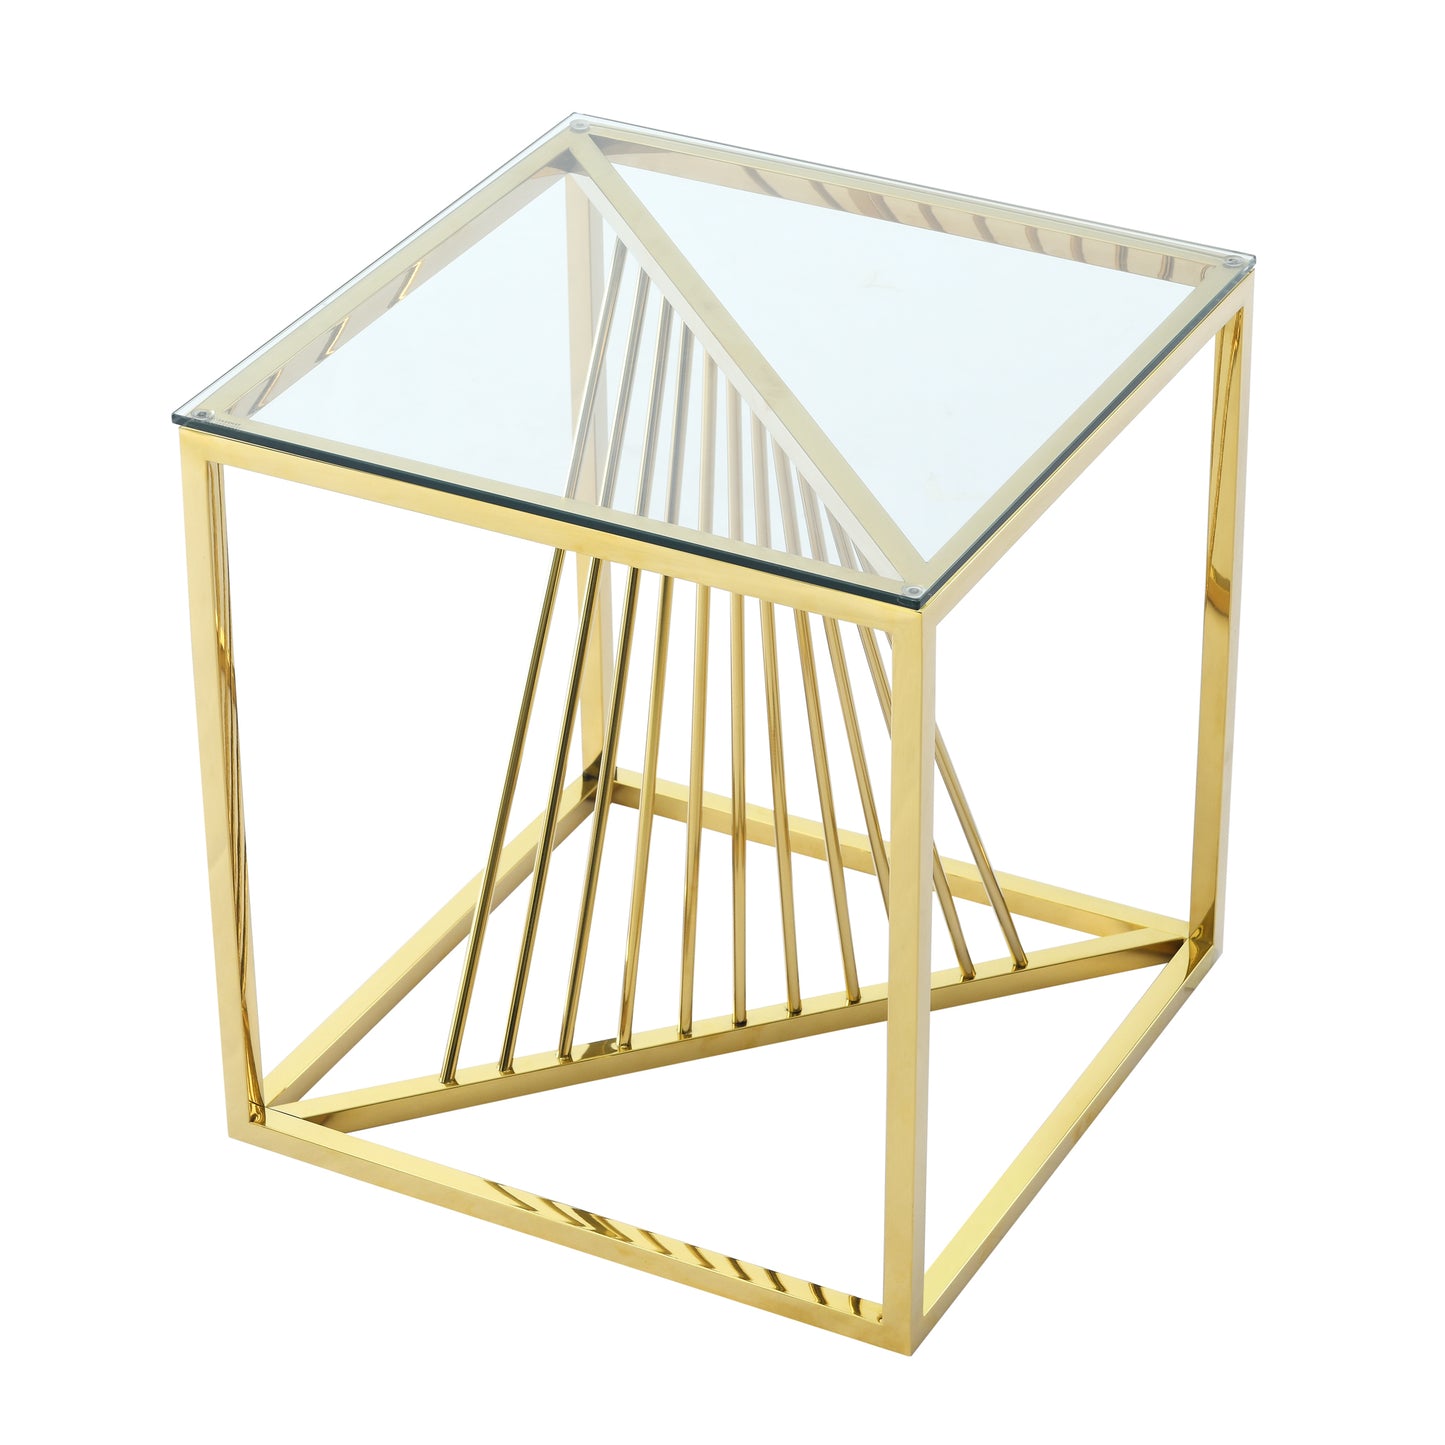 20 Inch Modern Glass End Table with Geometric Metal Frame, Accent Table Nightstand Furniture Corner Table for Living Room, Home Office, Bedroom - Gold